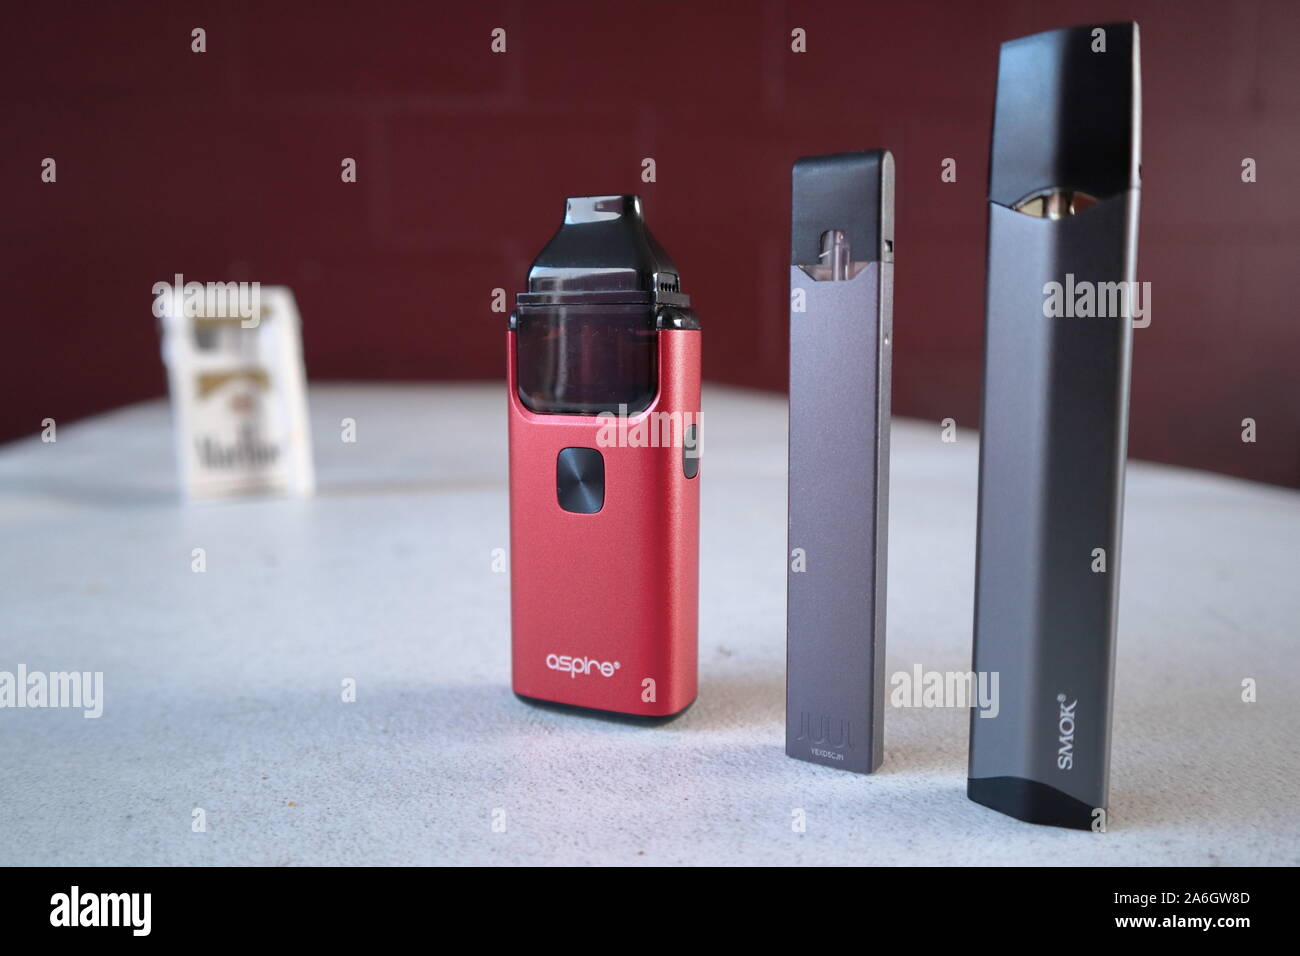 3 different vape pen electronic cigarette devices juul, aspire breeze, smok infinix, with a pack of Marlboro Gold cigarettes in the background out of Stock Photo